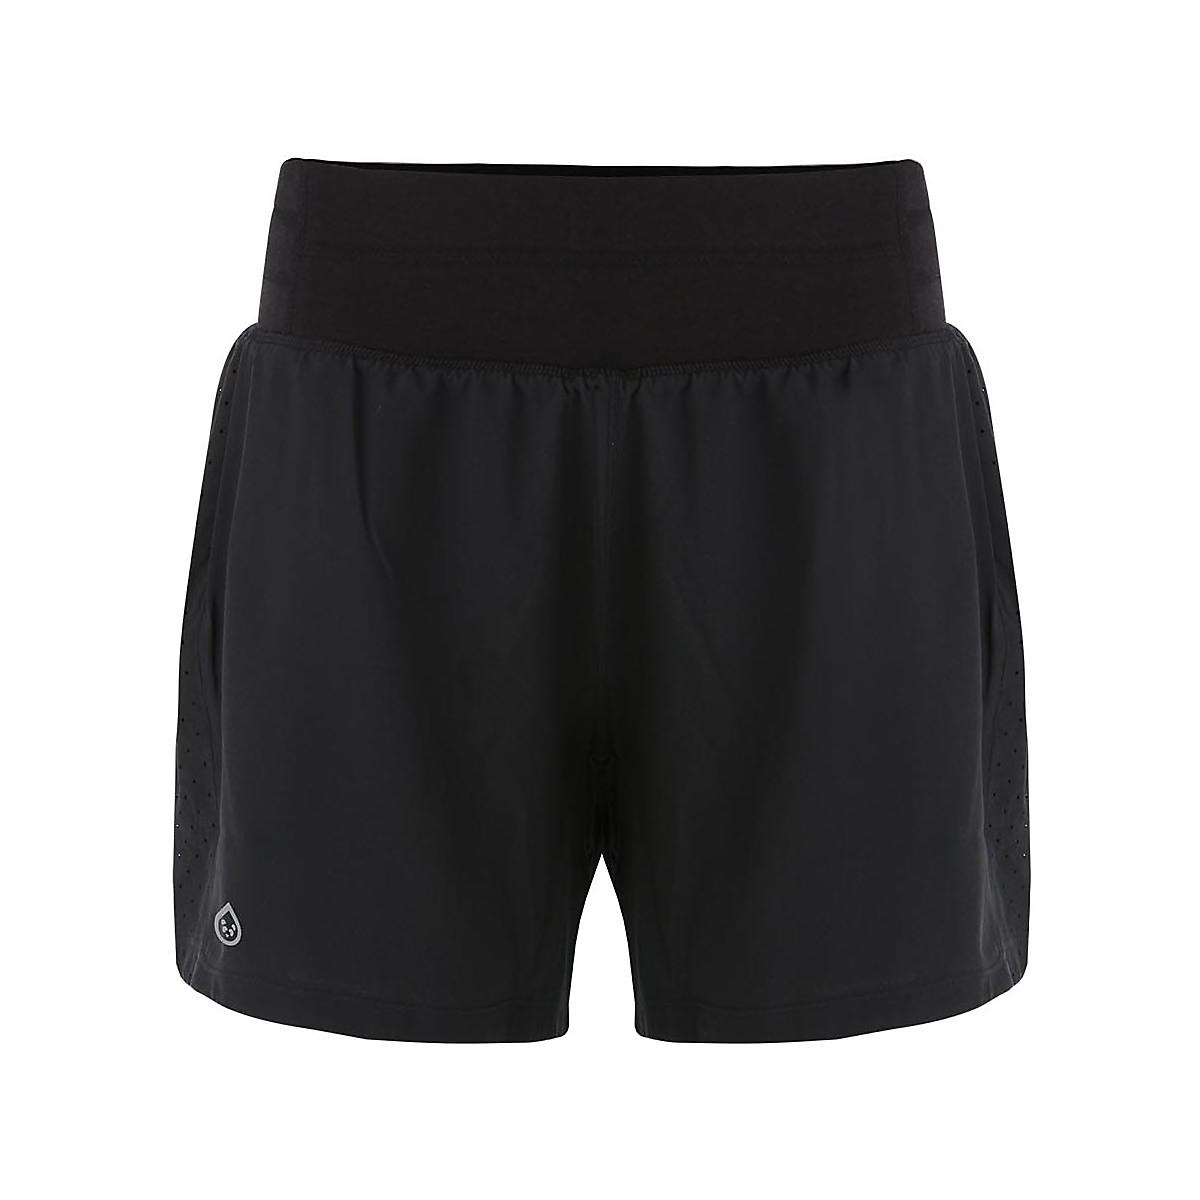 Womens Nike Mod Tempo Emboss Run Lined Shorts at Road Runner Sports